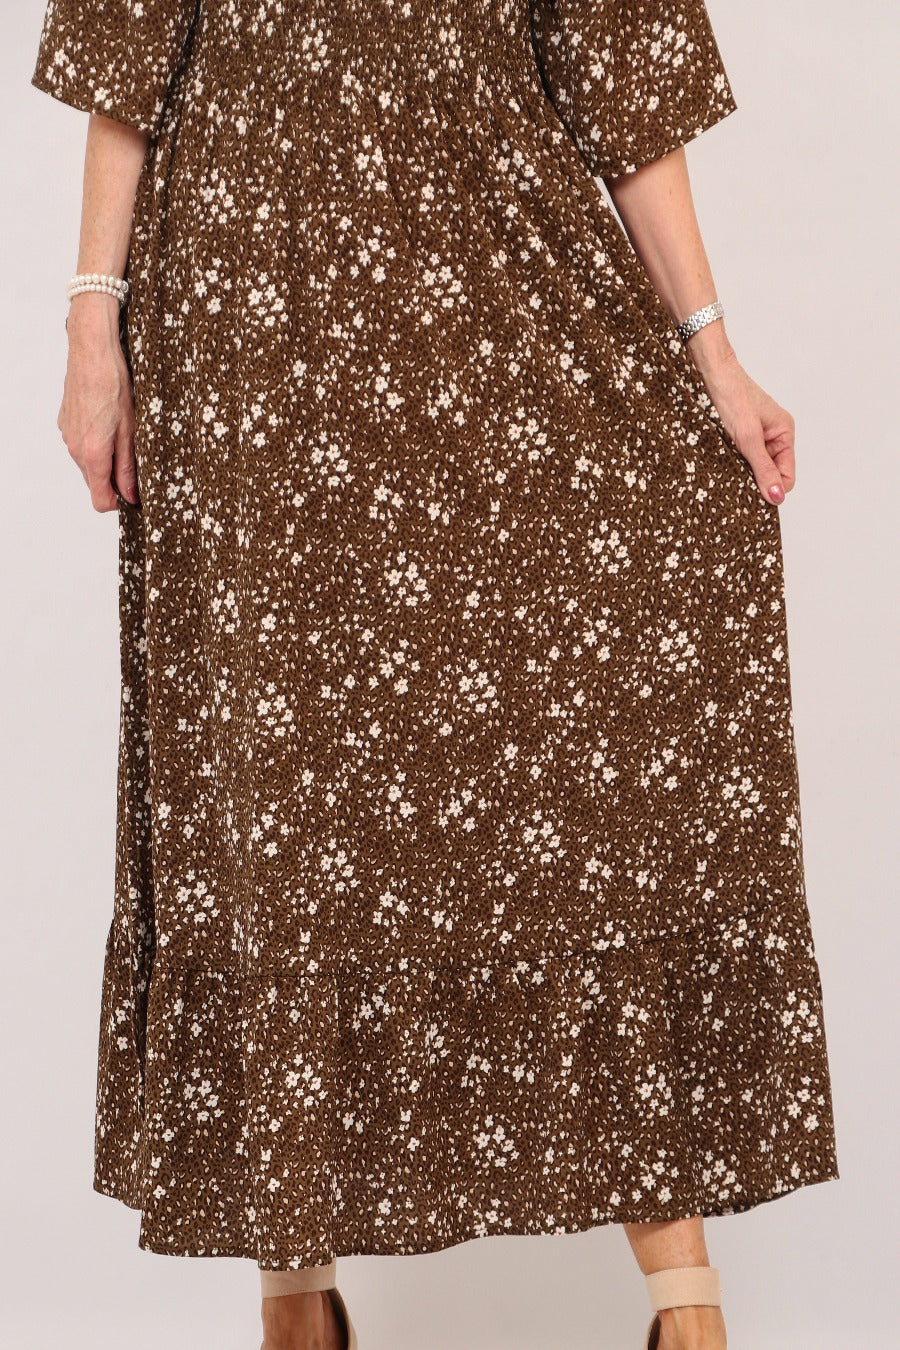 Animal and Floral Shirred Waist Maxi Dress